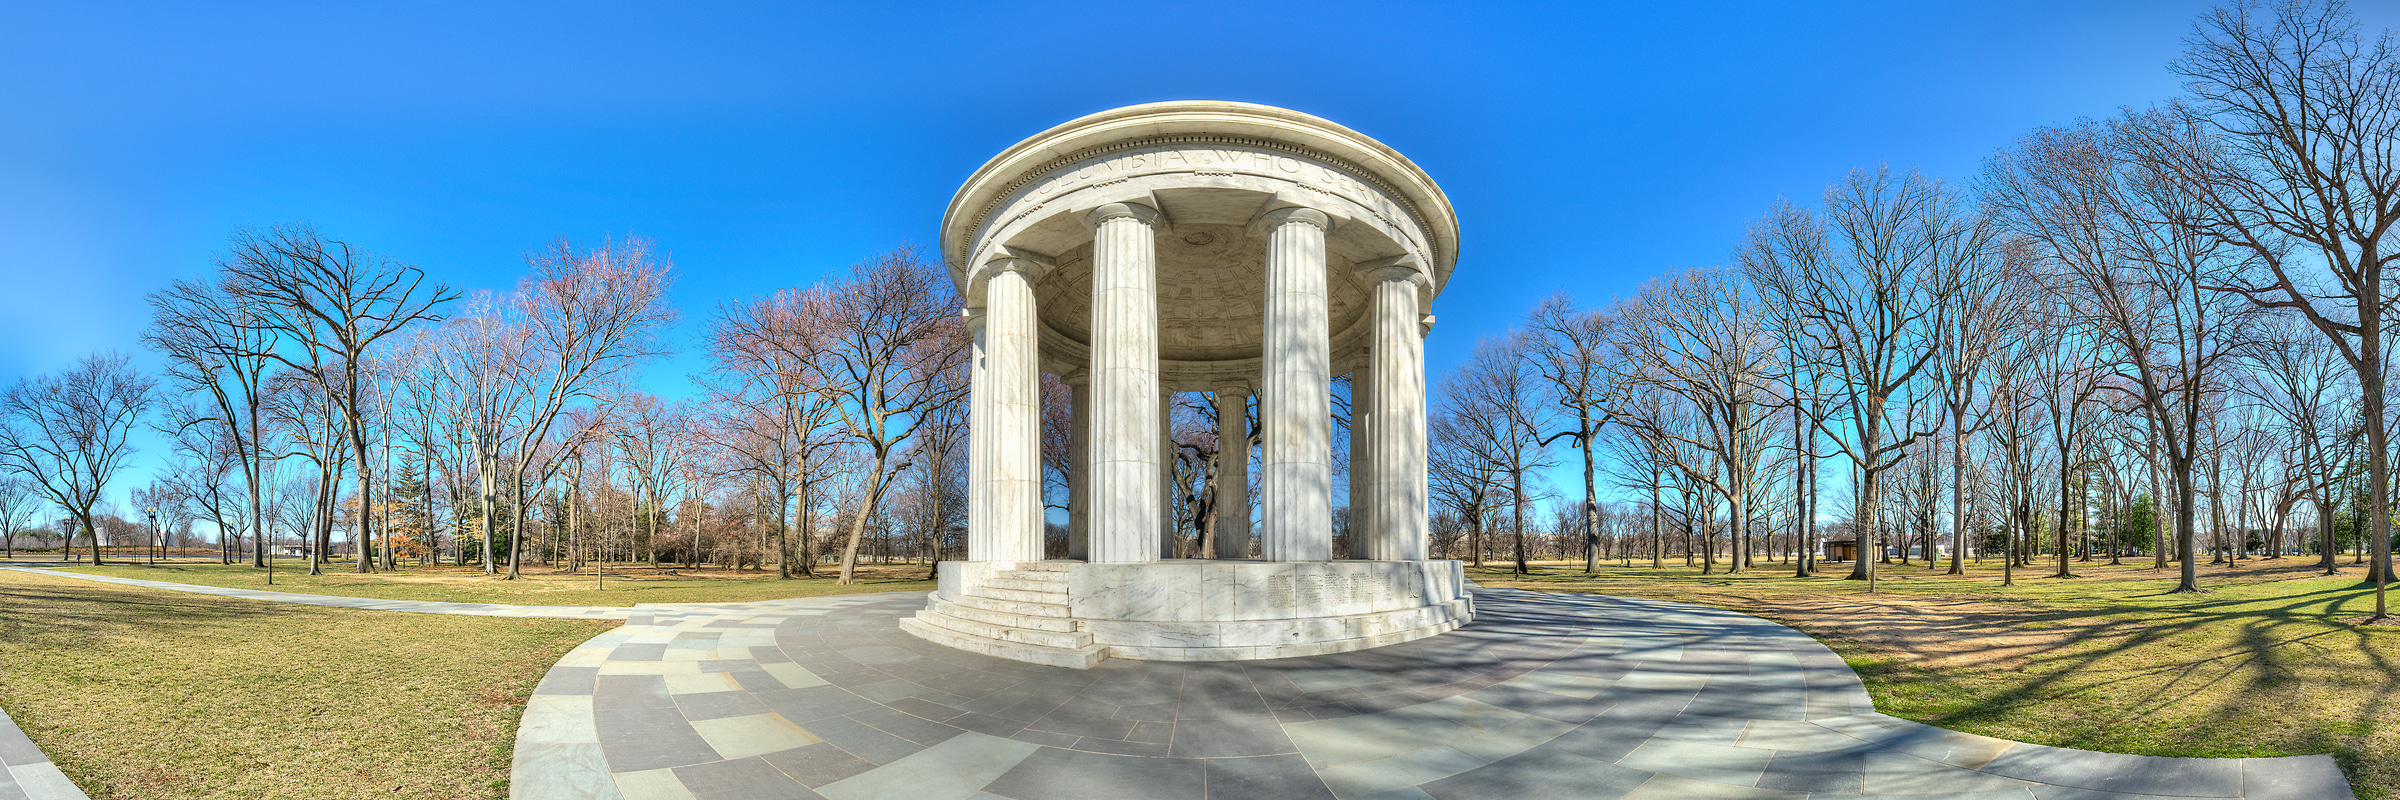 269 megapixels! A very high resolution, large-format VAST photo print of the Washington D.C. War Memorial; panorama photograph created by Tim Lo Monaco in D.C. War Memorial, National Mall, Washington, D.C.